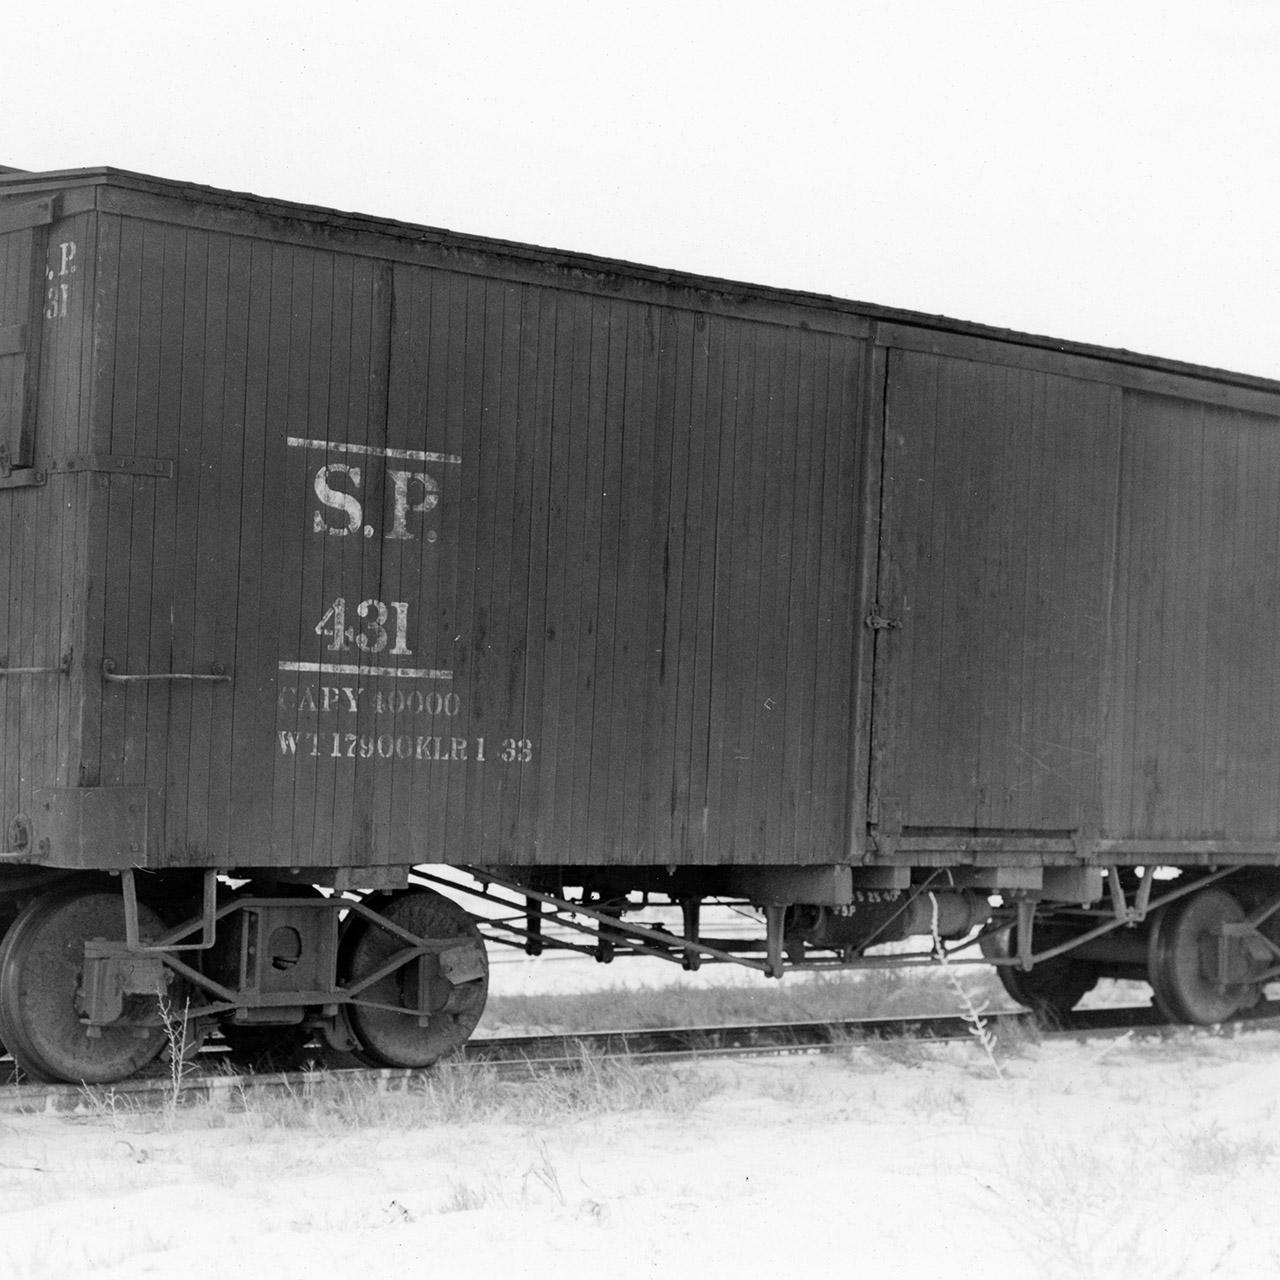 Boxcar #431 in Laws, 1939.